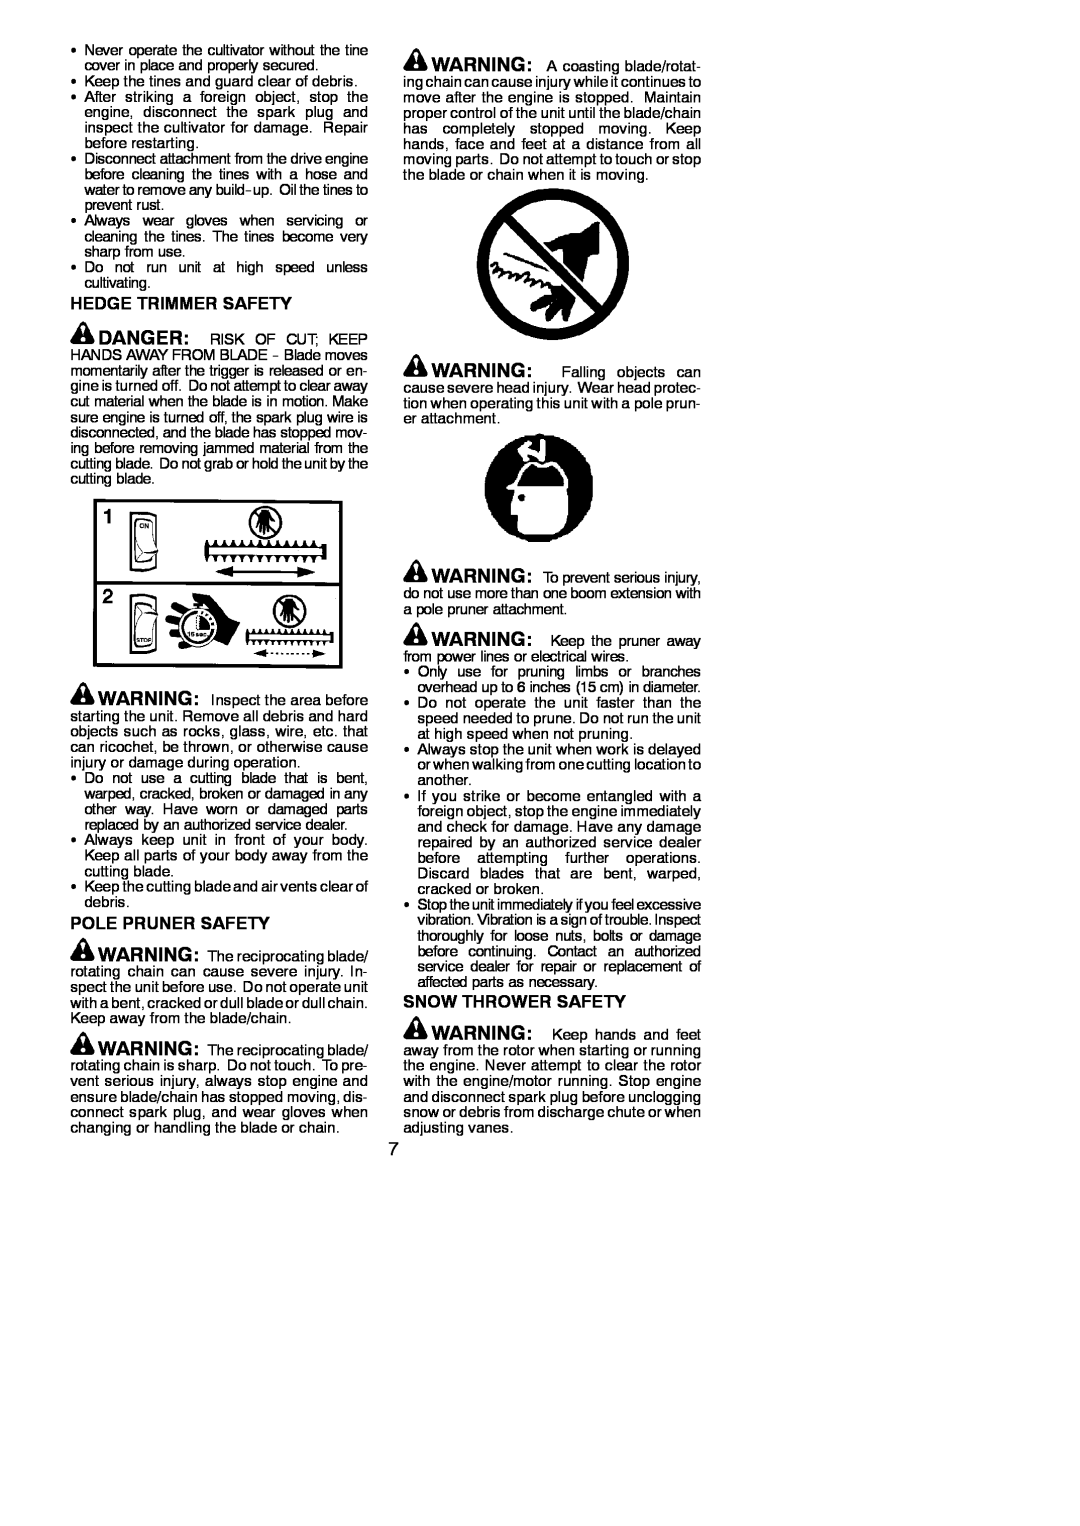 Poulan 952711879 instruction manual Hedge Trimmer Safety, Pole Pruner Safety, Snow Thrower Safety 